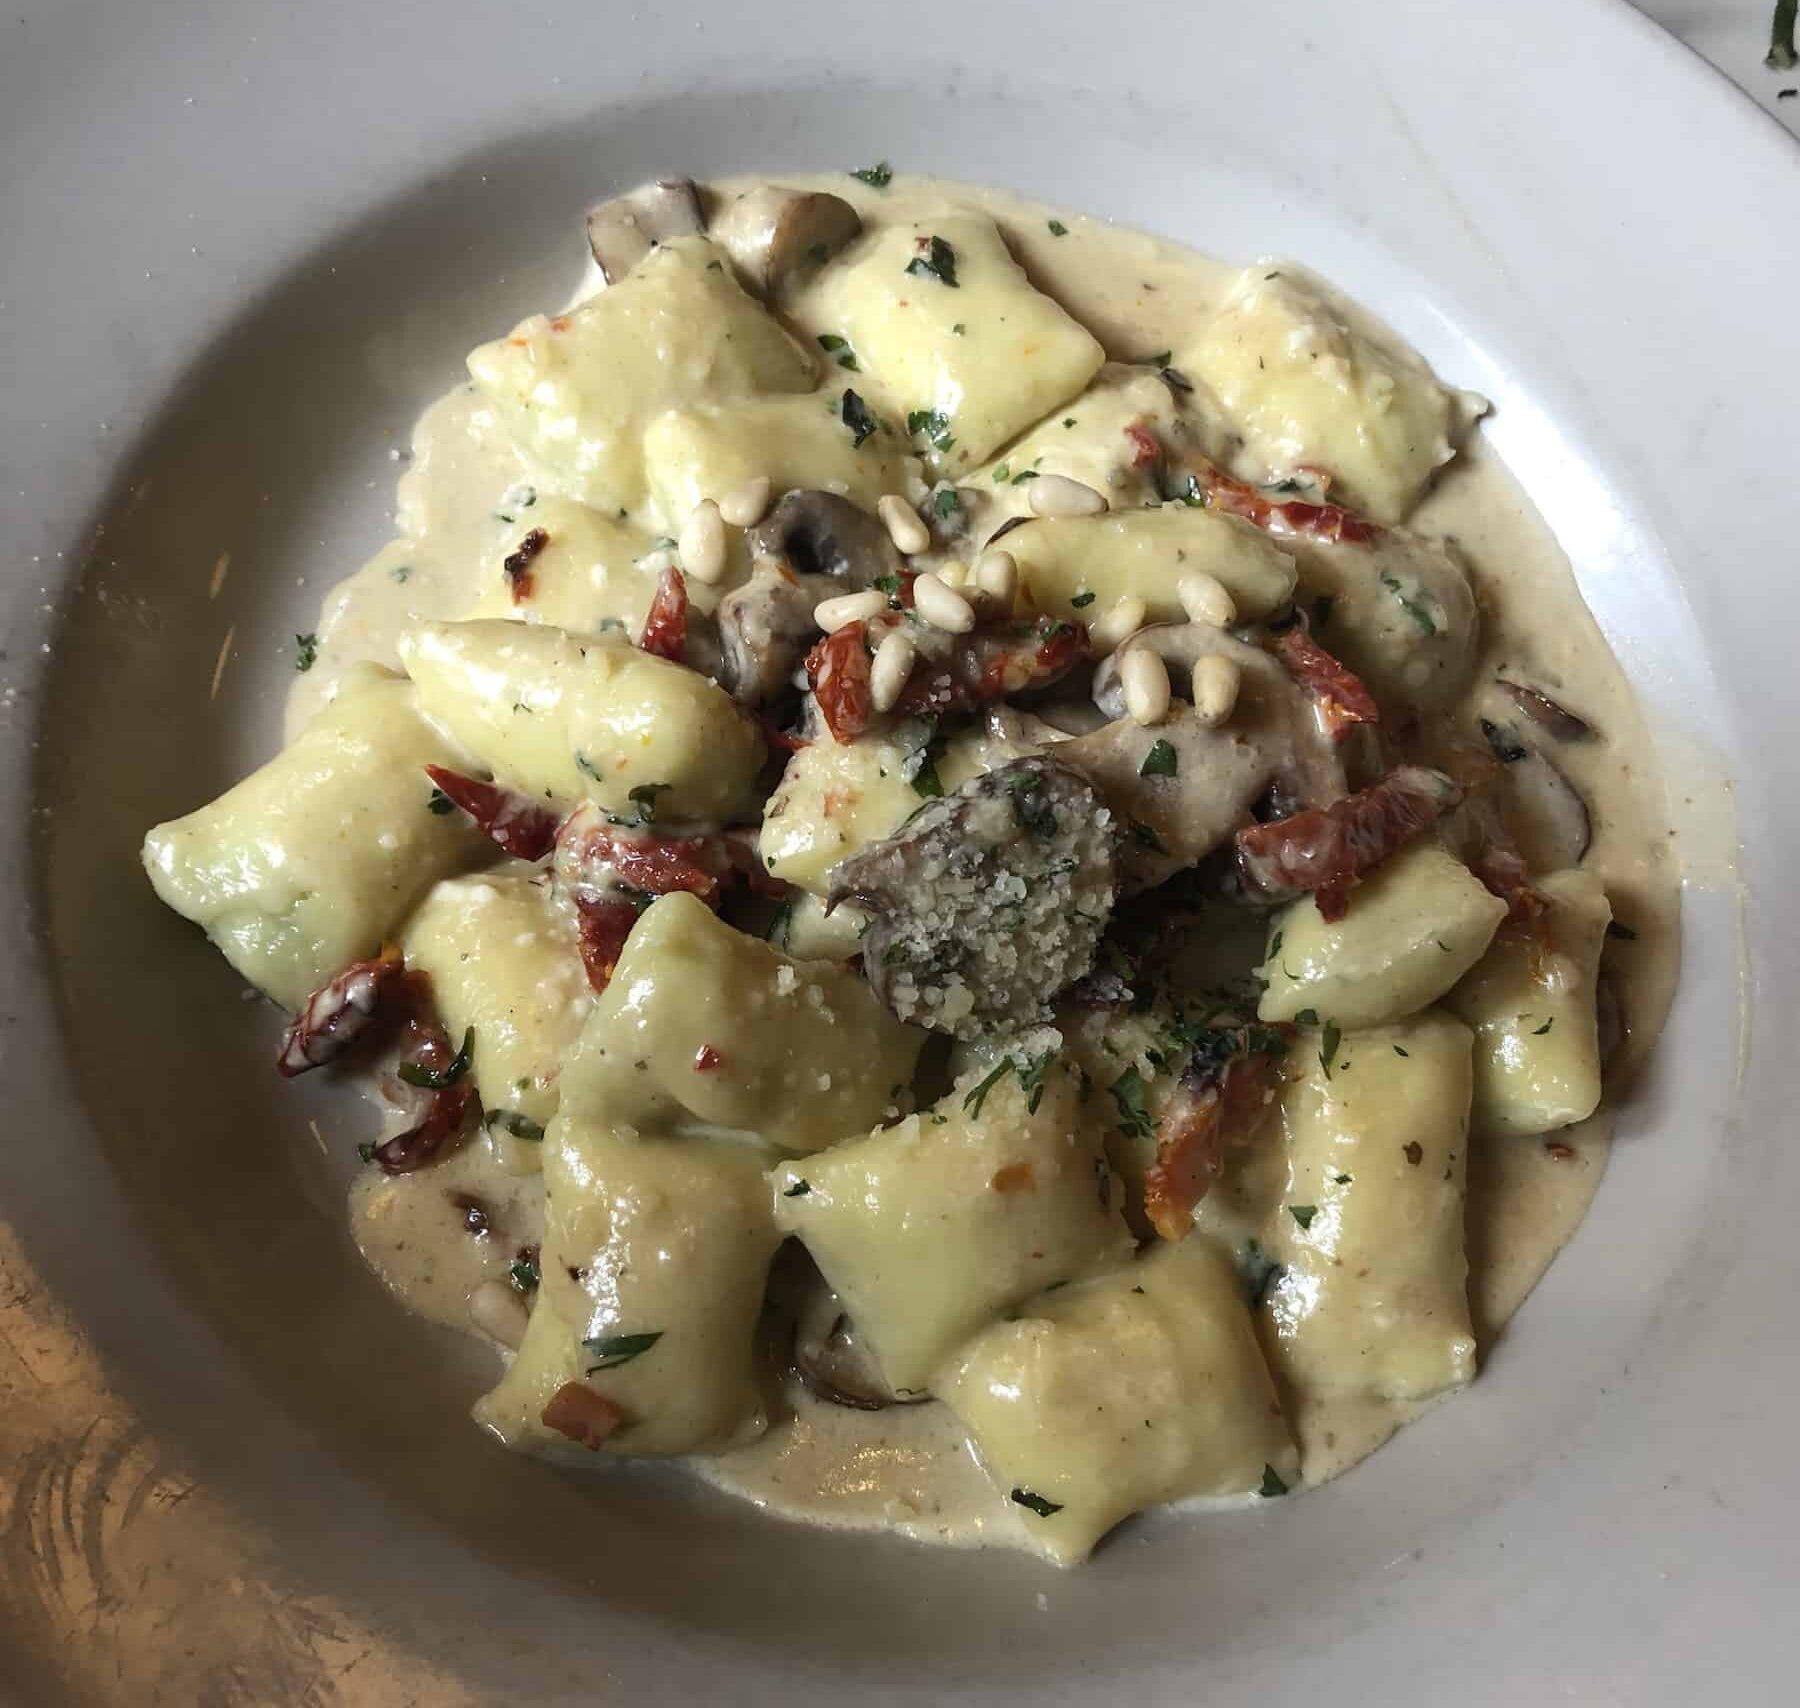 Gnocchi mantovana at Francesca's on Chestnut in the Chicago Gold Coast